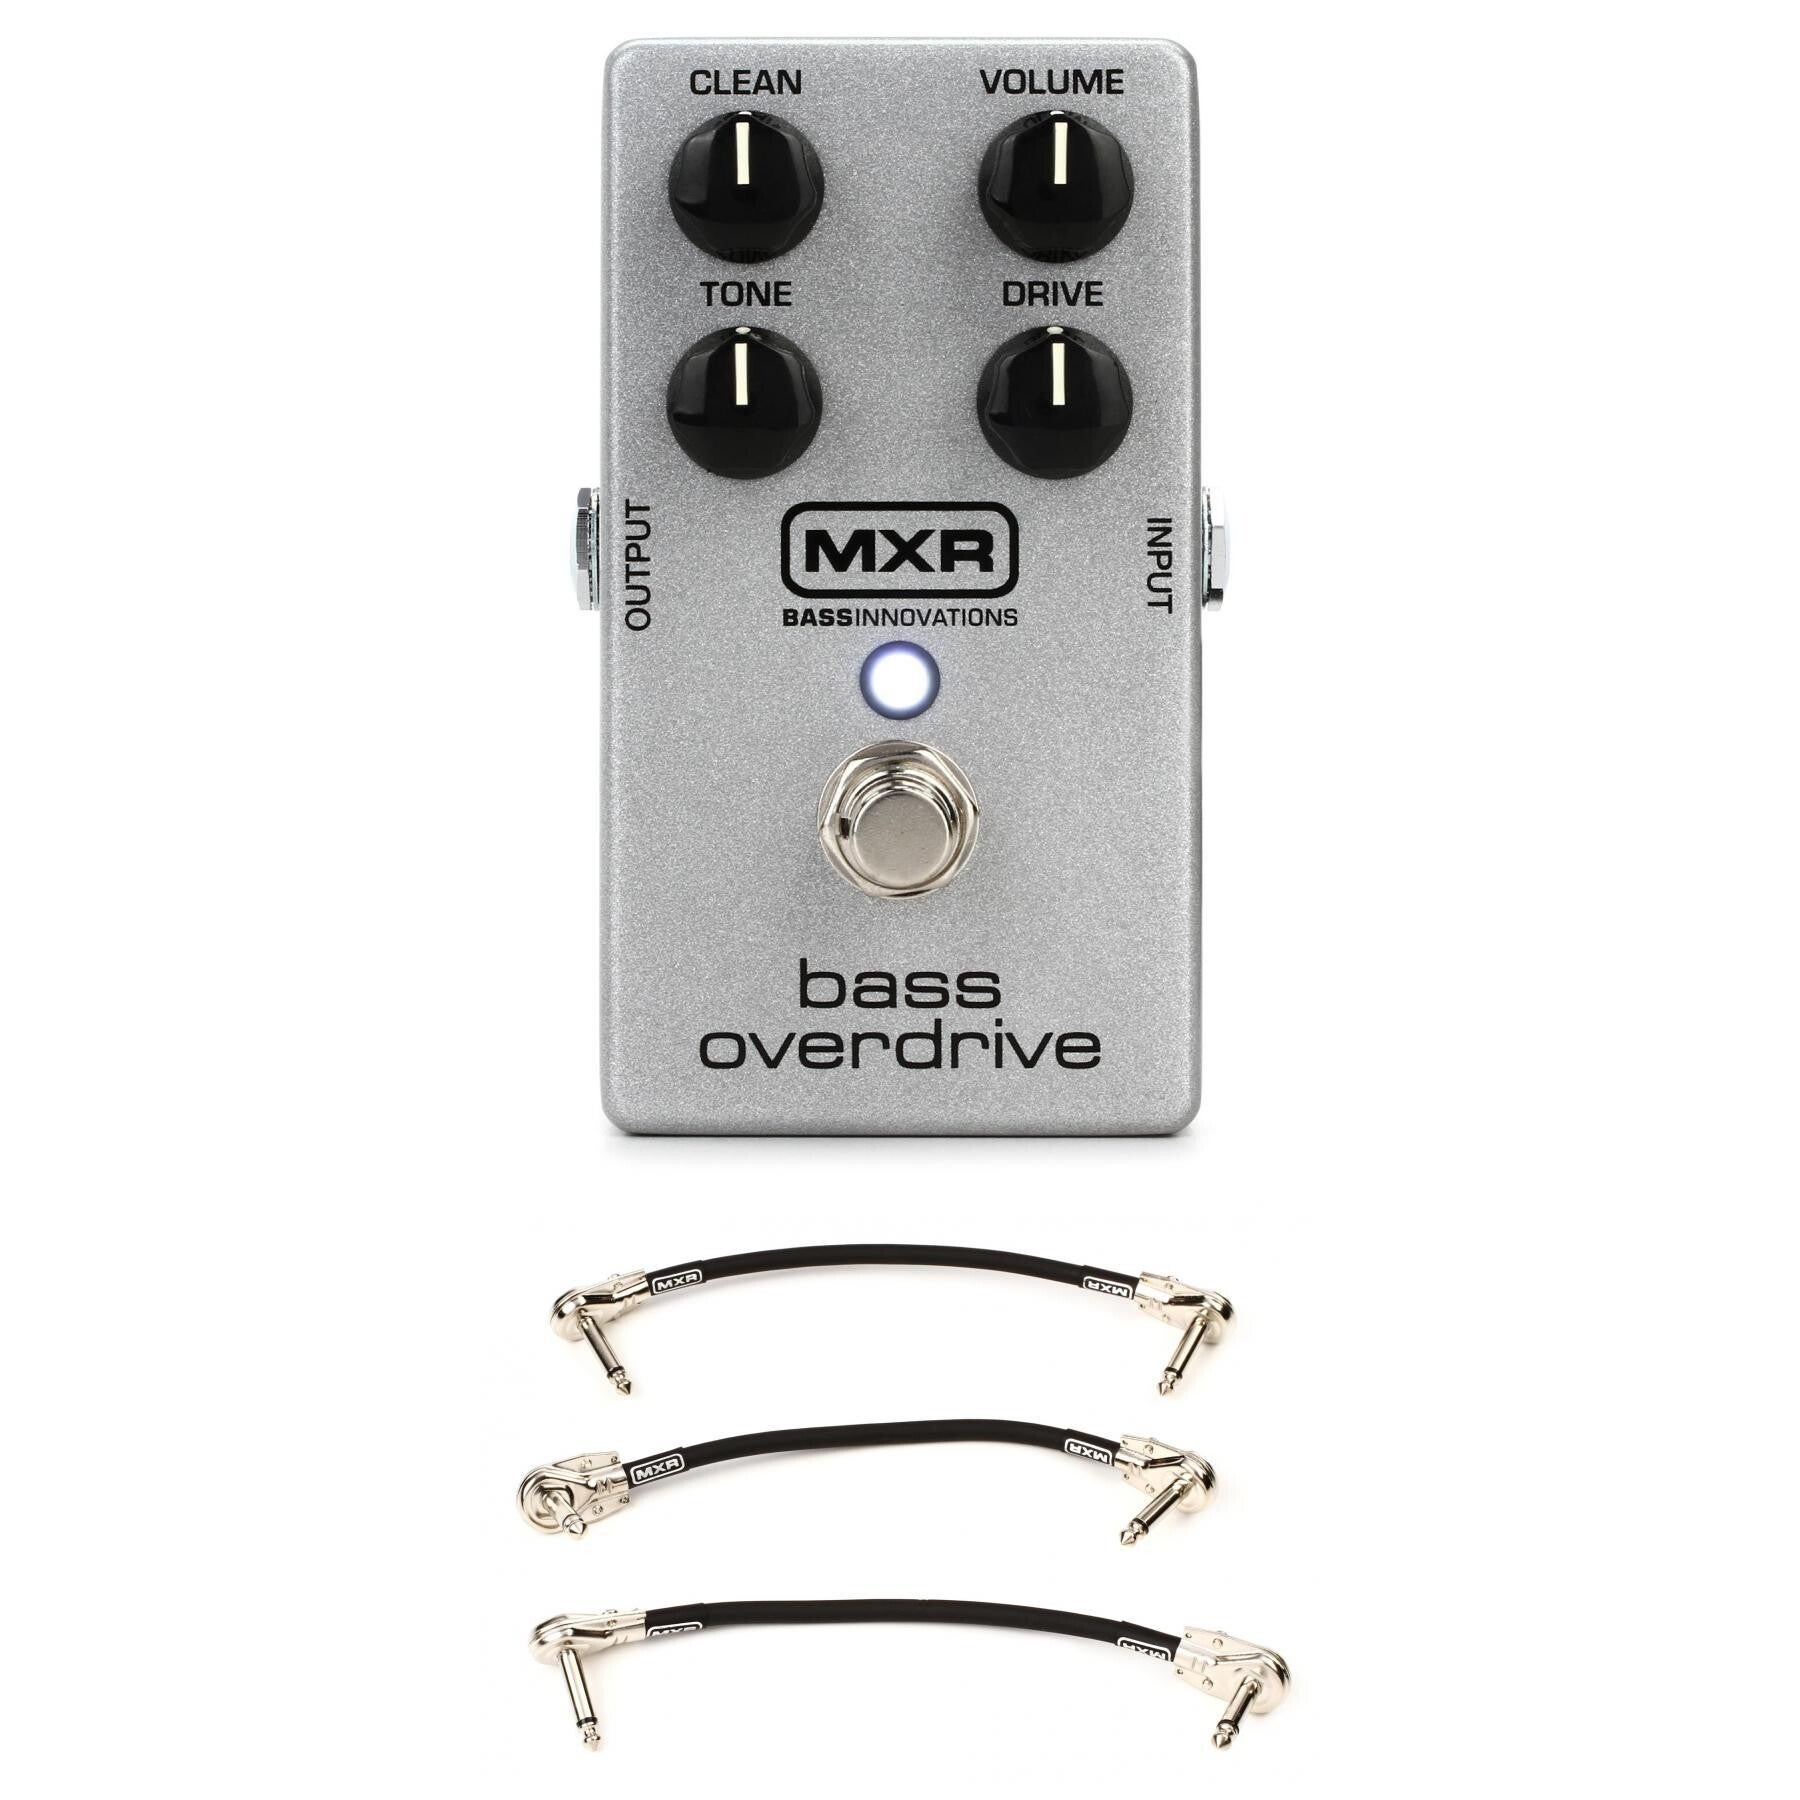 MXR M89 Bass Overdrive Pedal with 3 Patch Cables